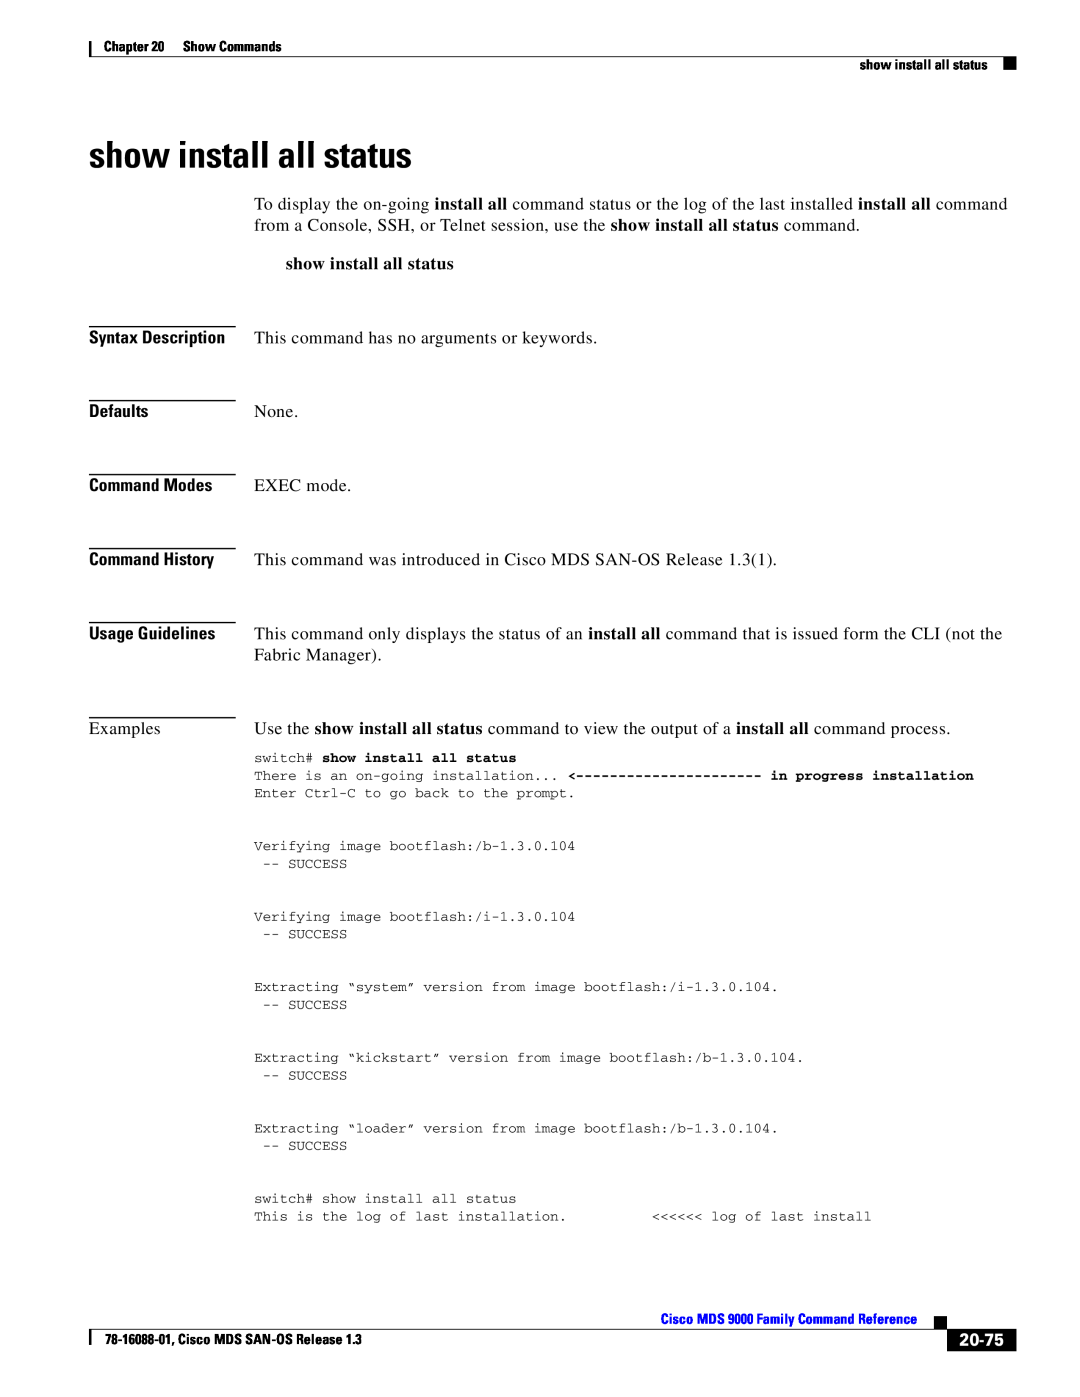 Cisco Systems MDS 9000 manual show install all status, 20-75, Defaults, Command Modes, Usage Guidelines 